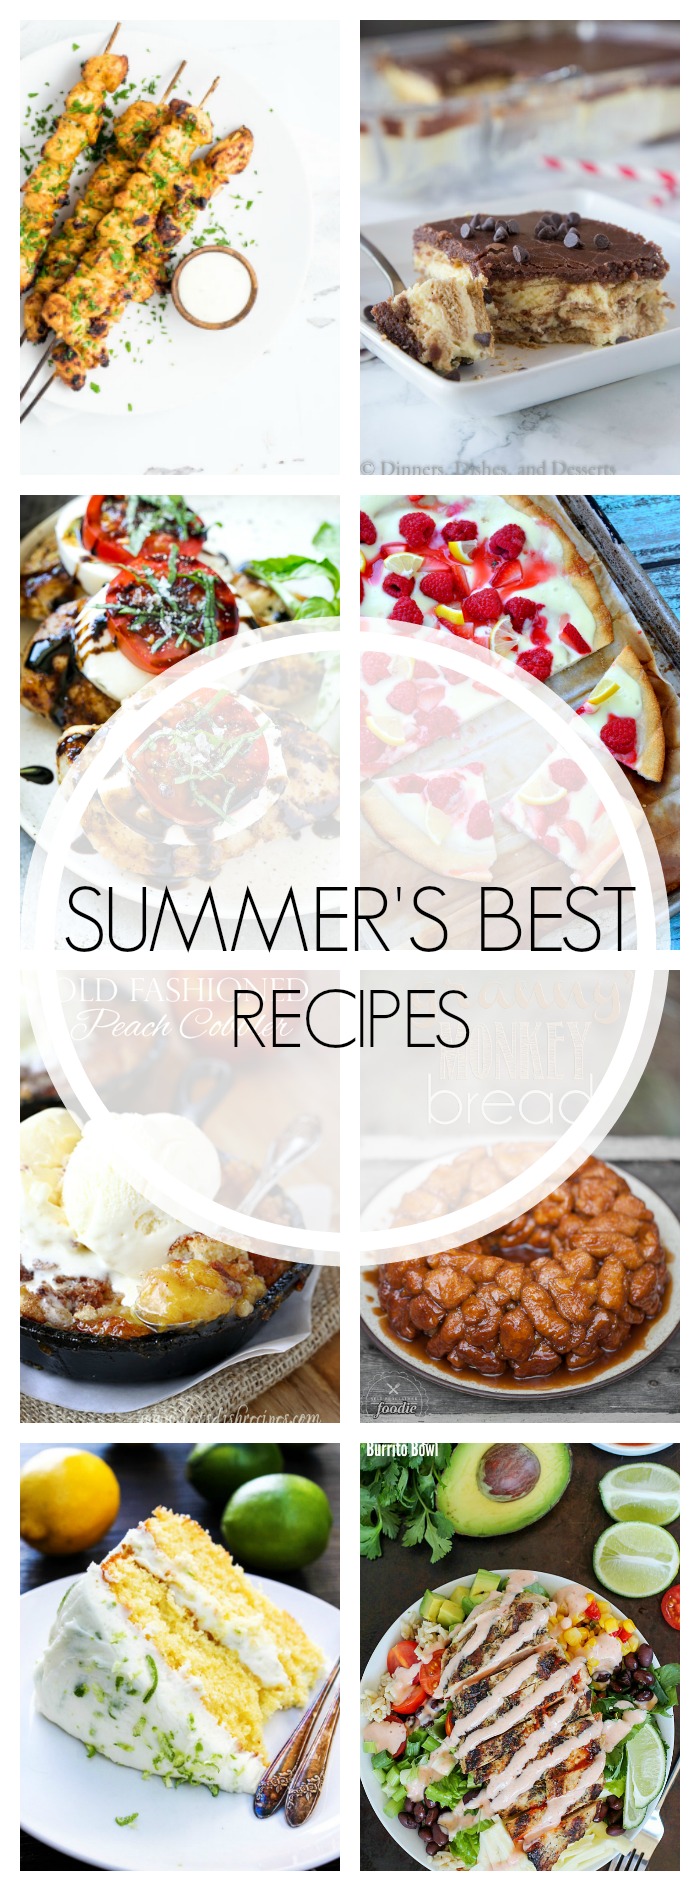 Summer Recipes You Don't Want to Miss - From grilled dinner ideas and delicious salads to lots of fruity desserts! These are must make family recipes! | The Love Nerds